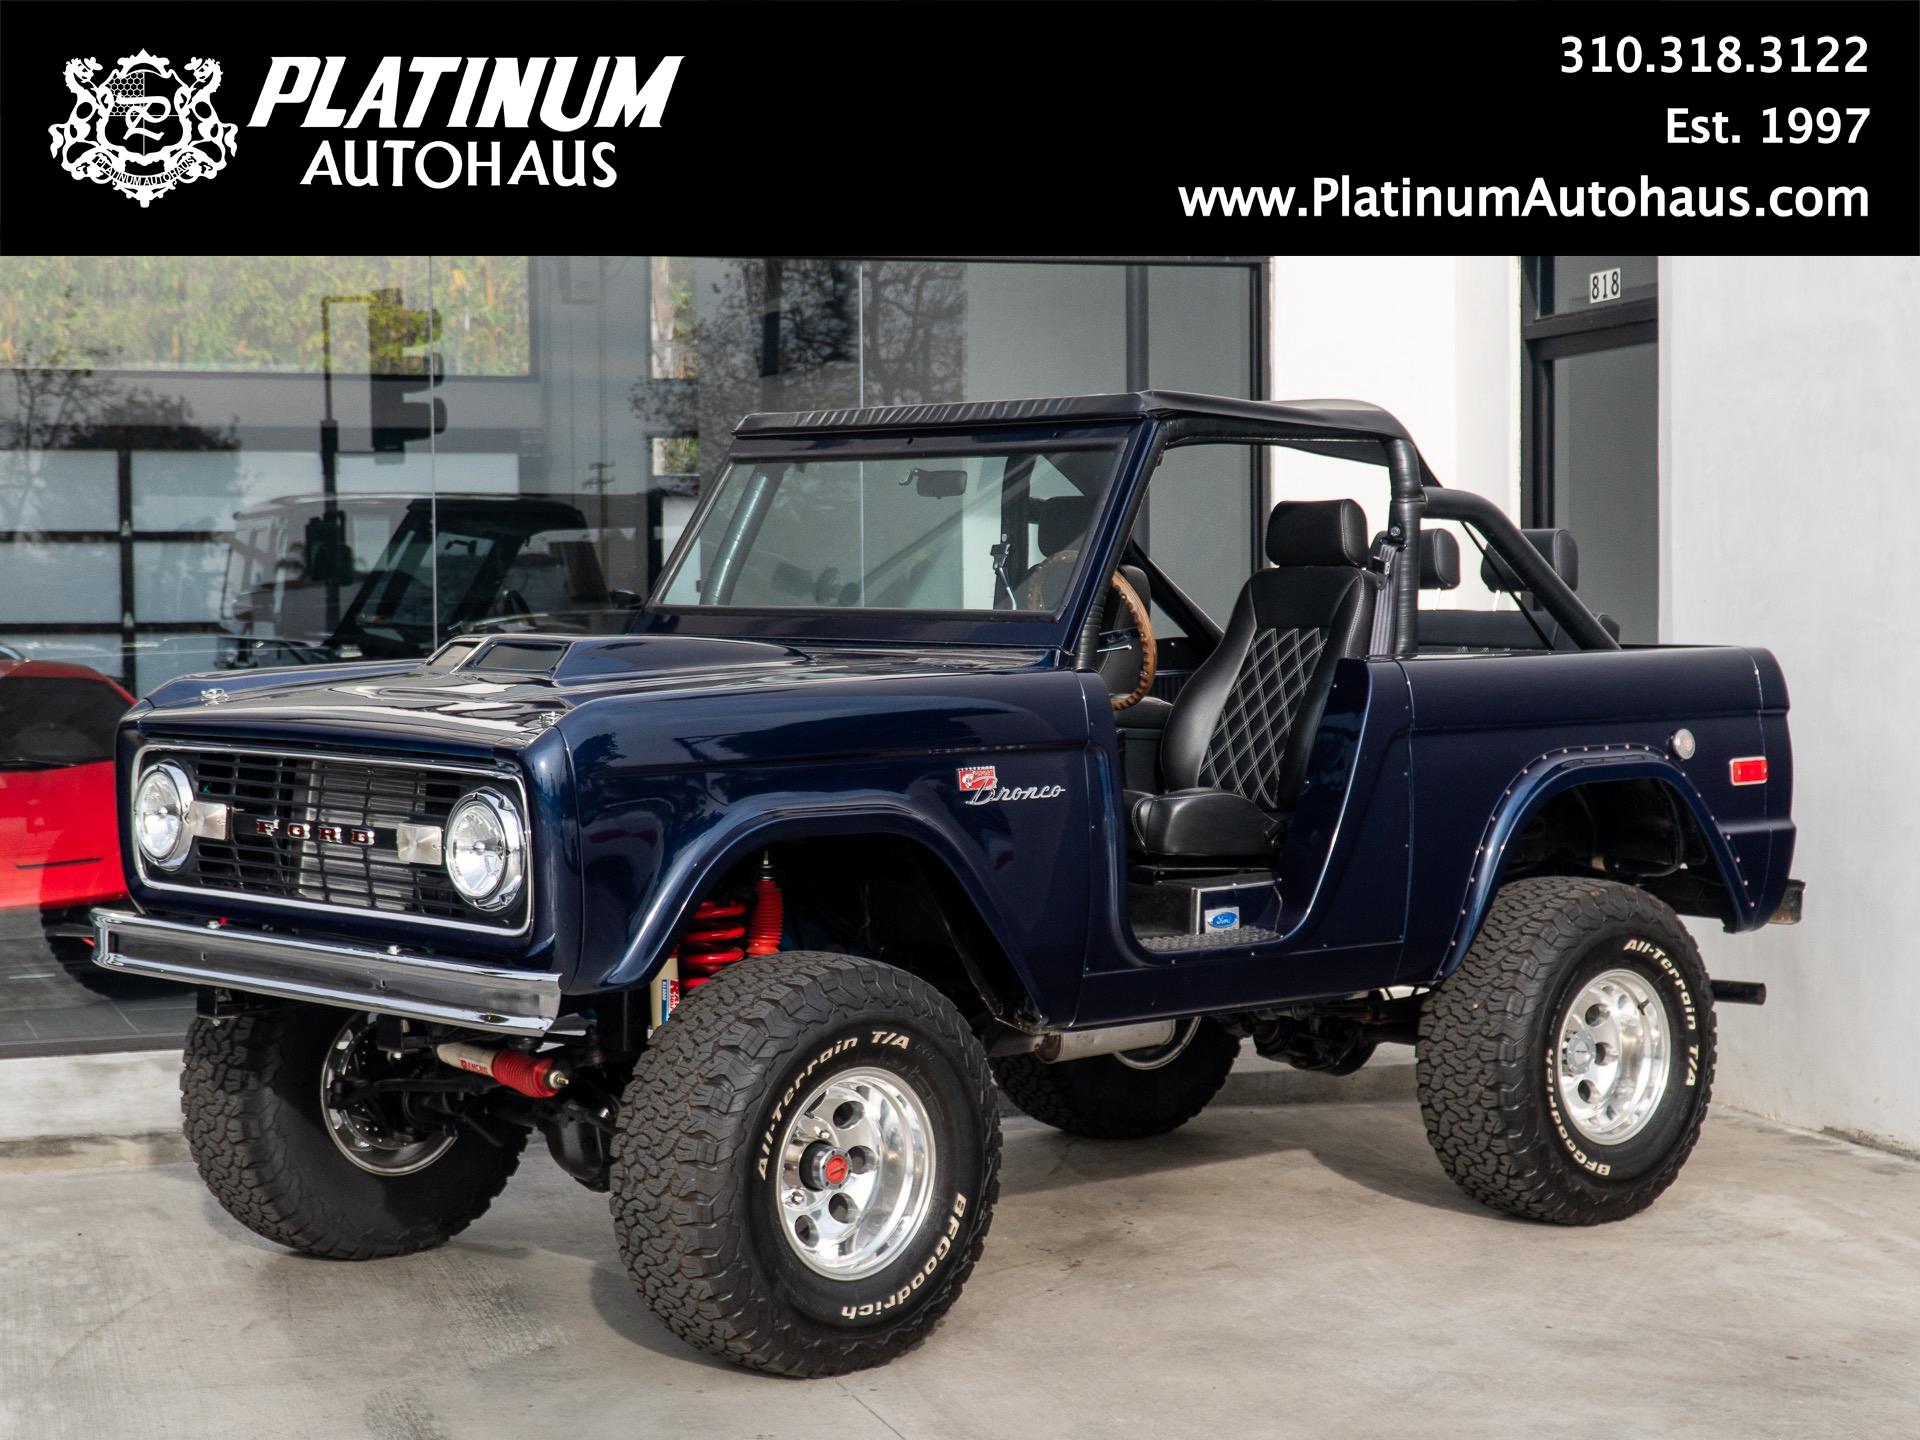 1973 Ford Bronco For Sale Near Me